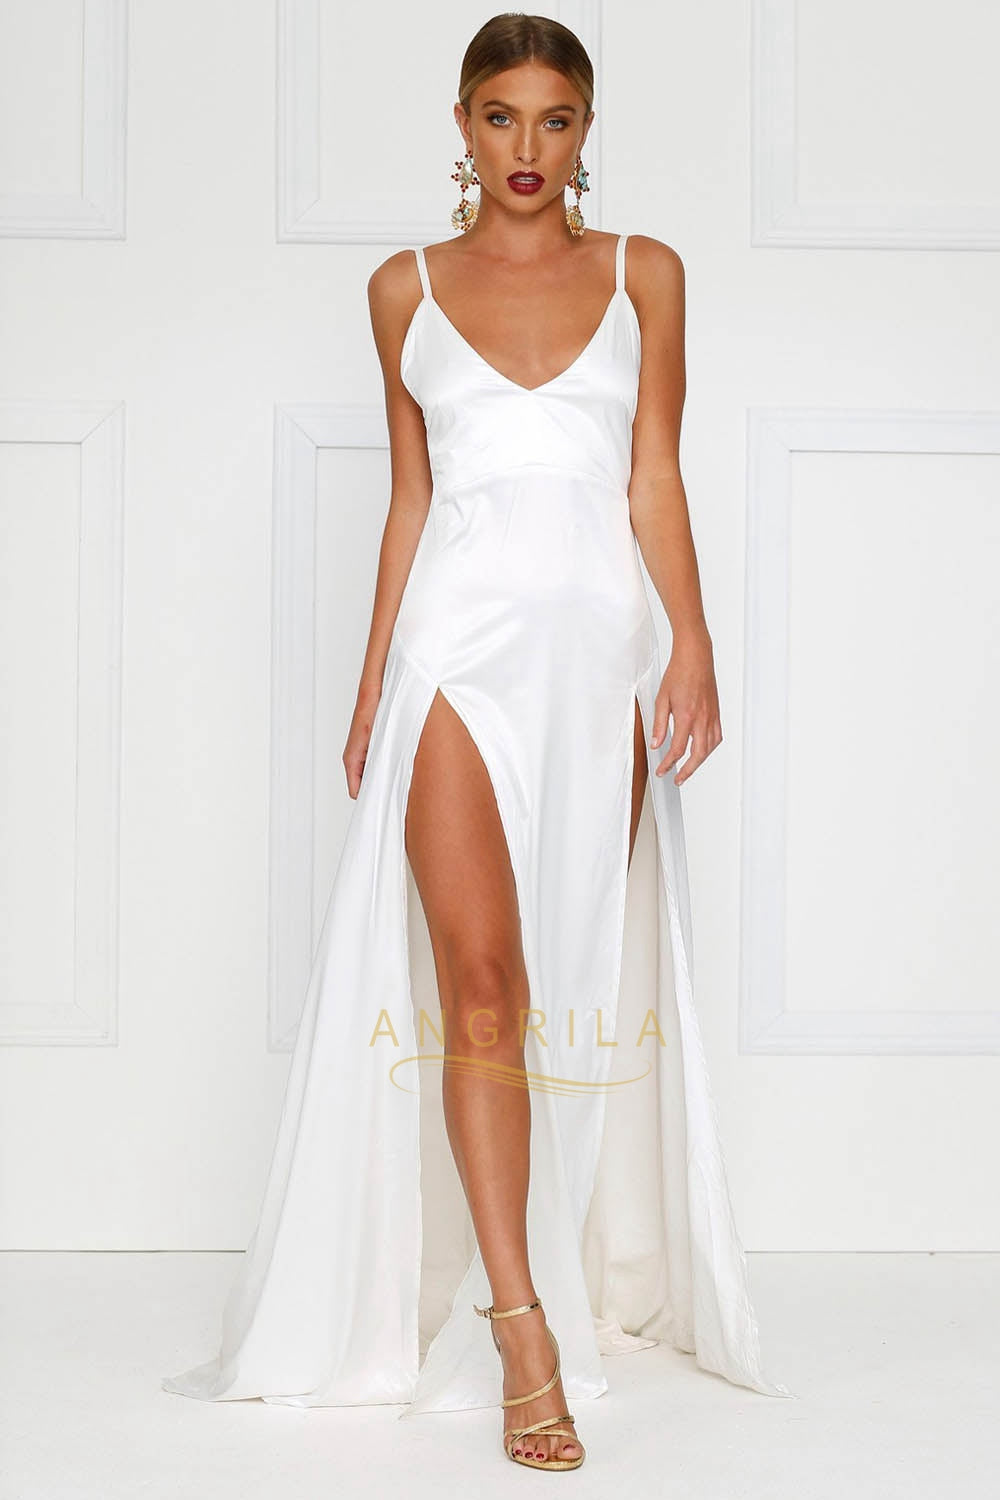 Sexy Long Satin Prom Dress with Two Flirty Side Thigh-High Splits – Angrila